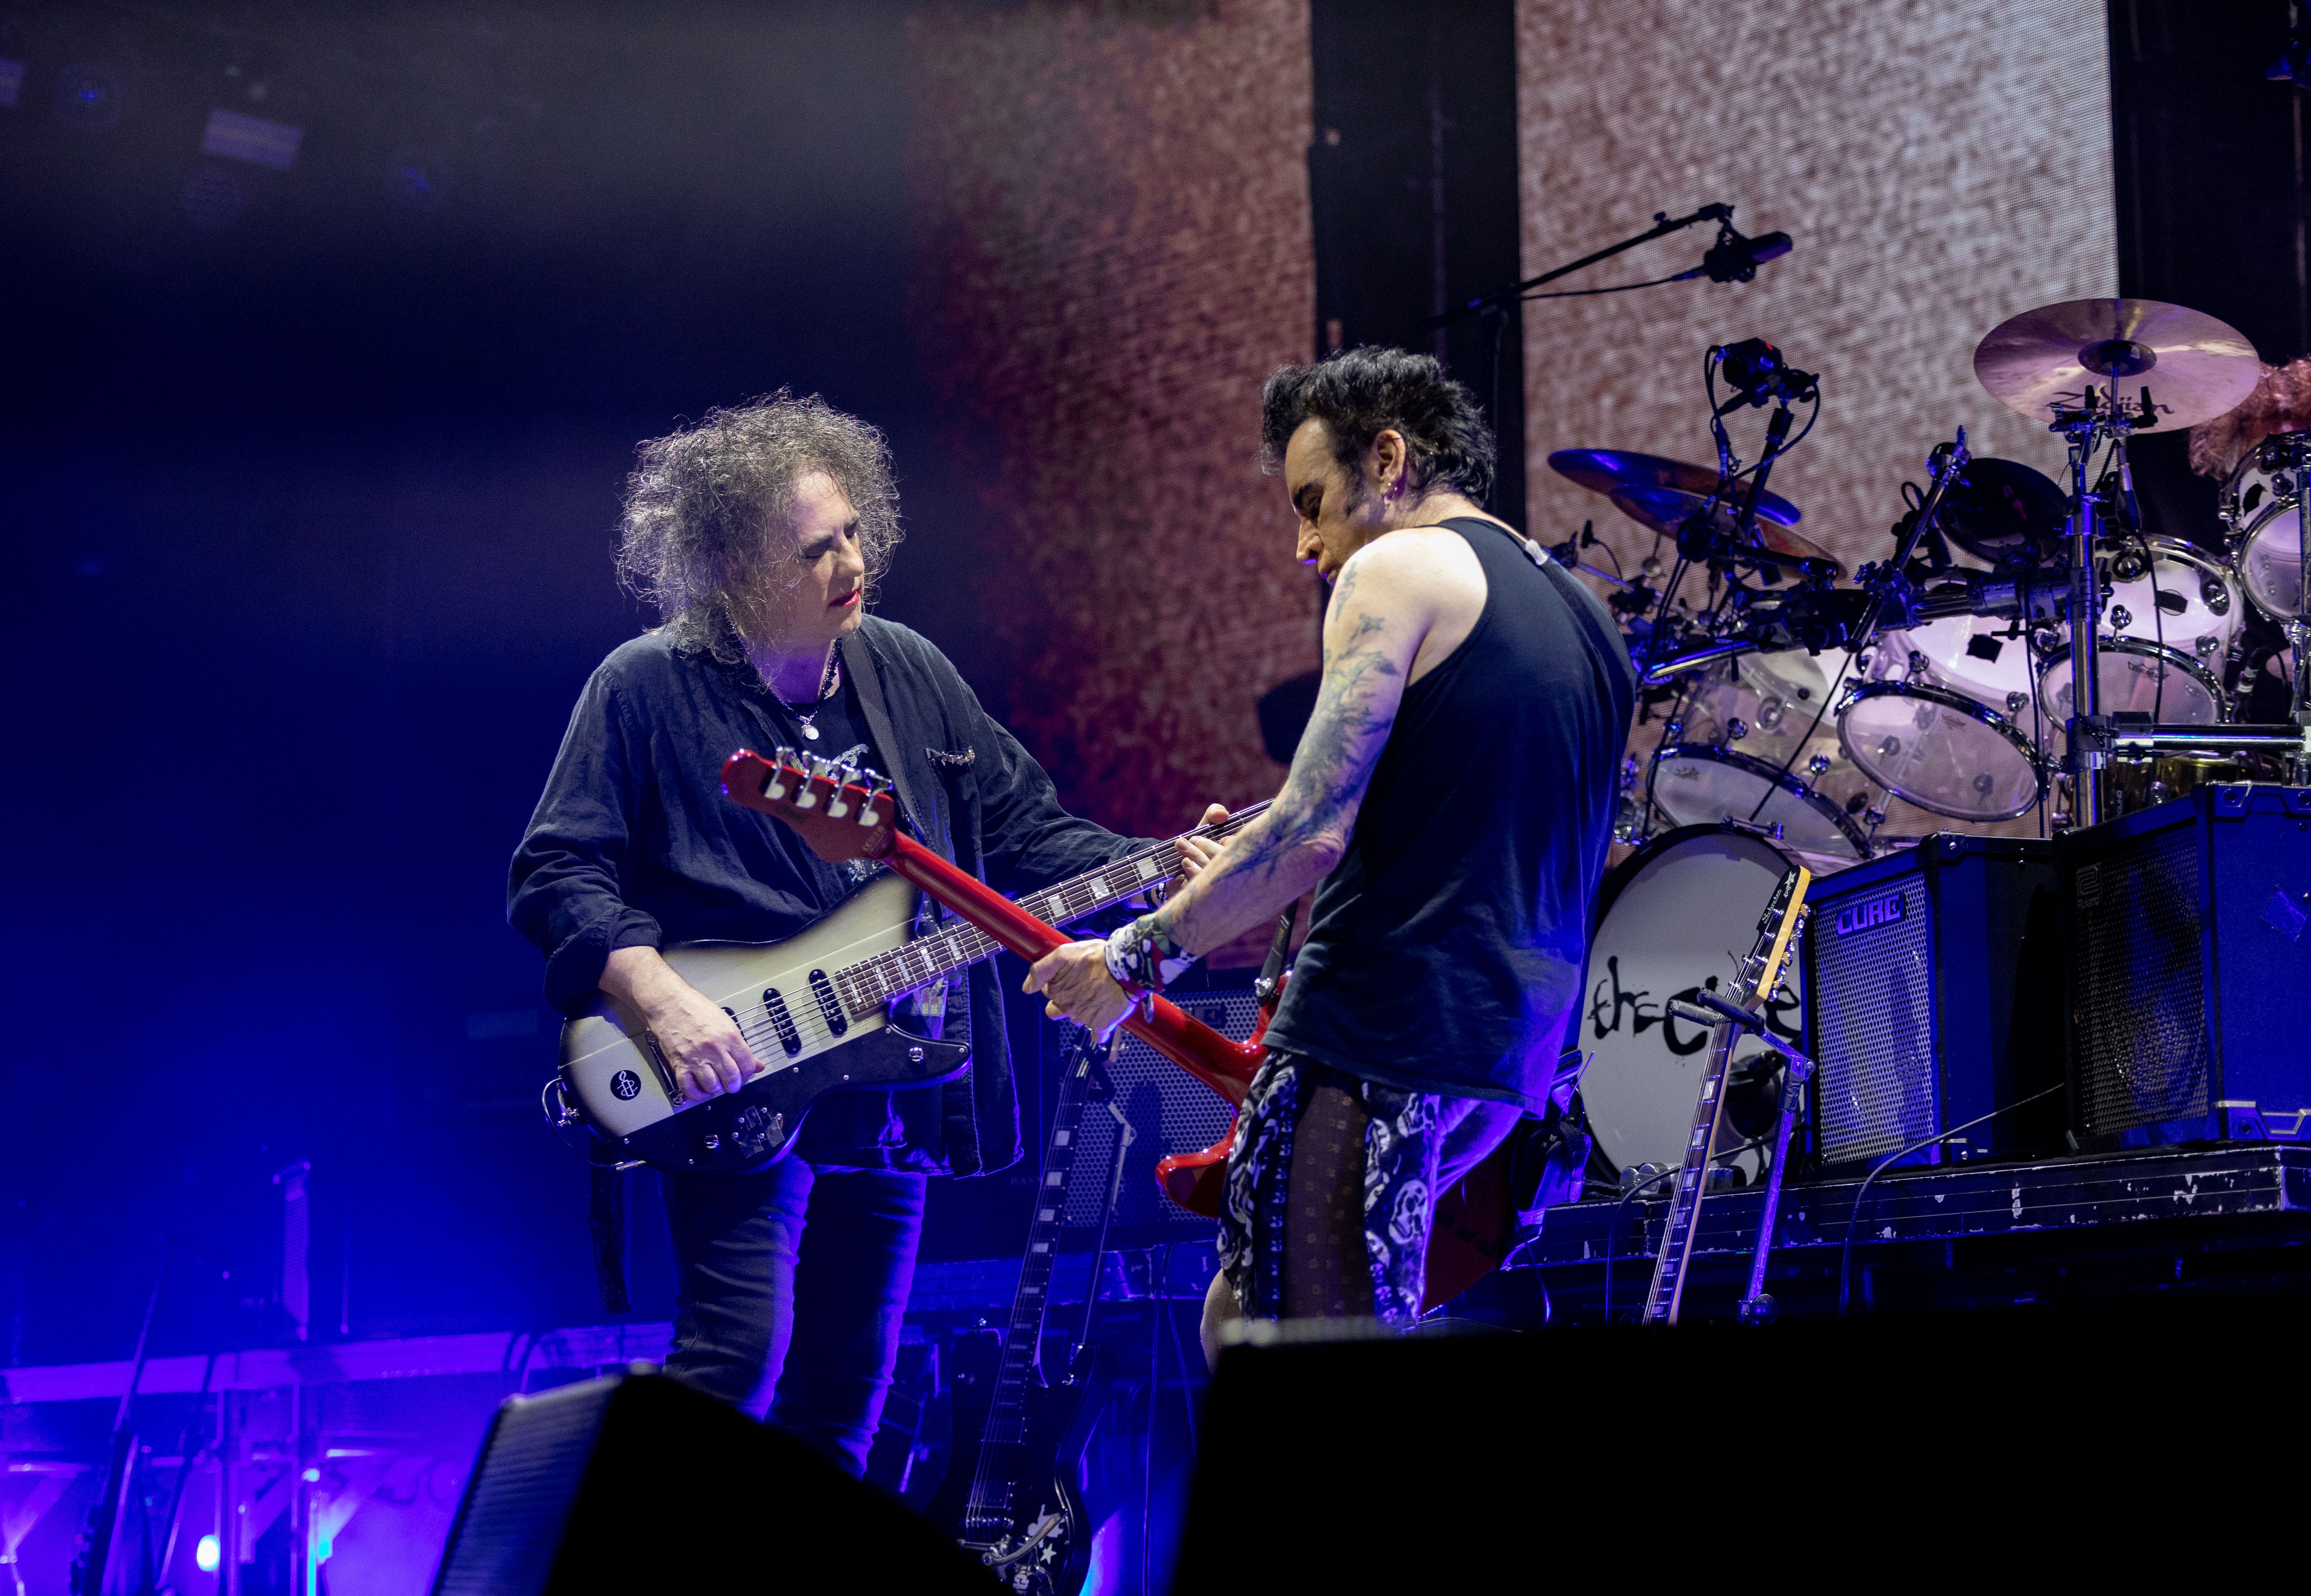 The Cure's Longtime Bassist Simon Gallup Says He's Leaving the